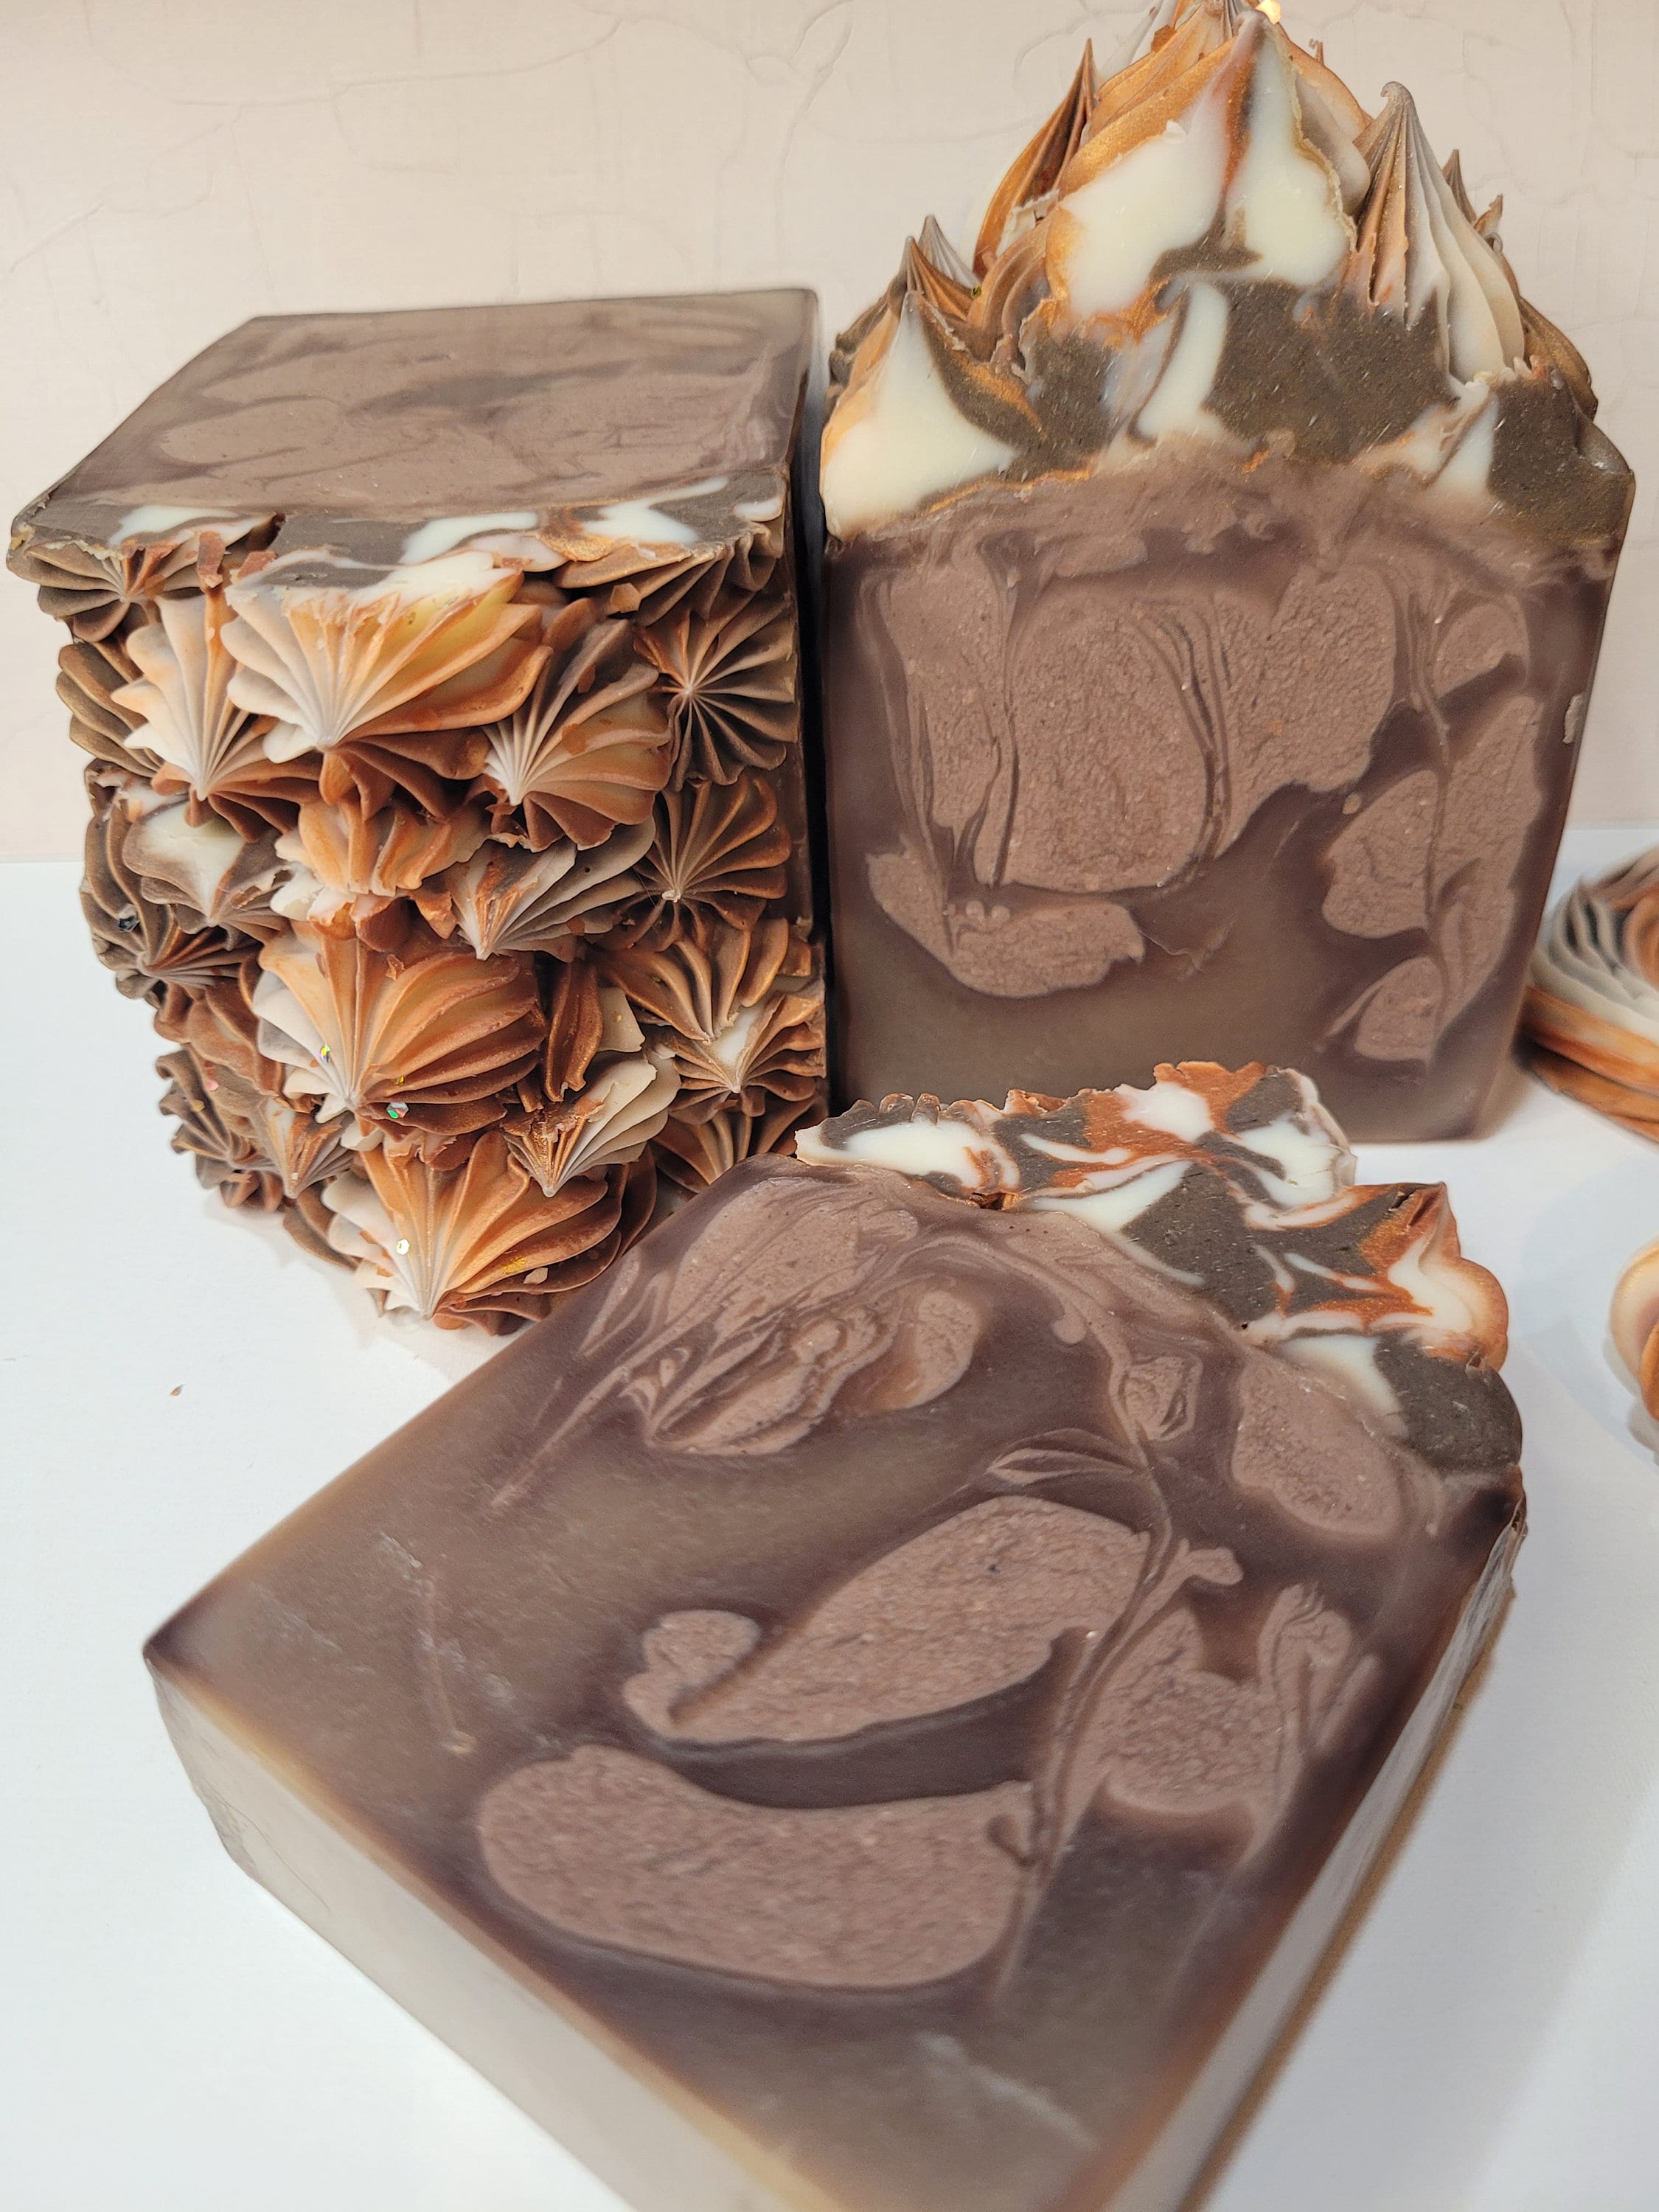 You'll love Cashmere Cocoa Butter Soap's unisex scent, blending cedarwood,  cocoa butter, and musk. Perfect gift for fall and holidays.